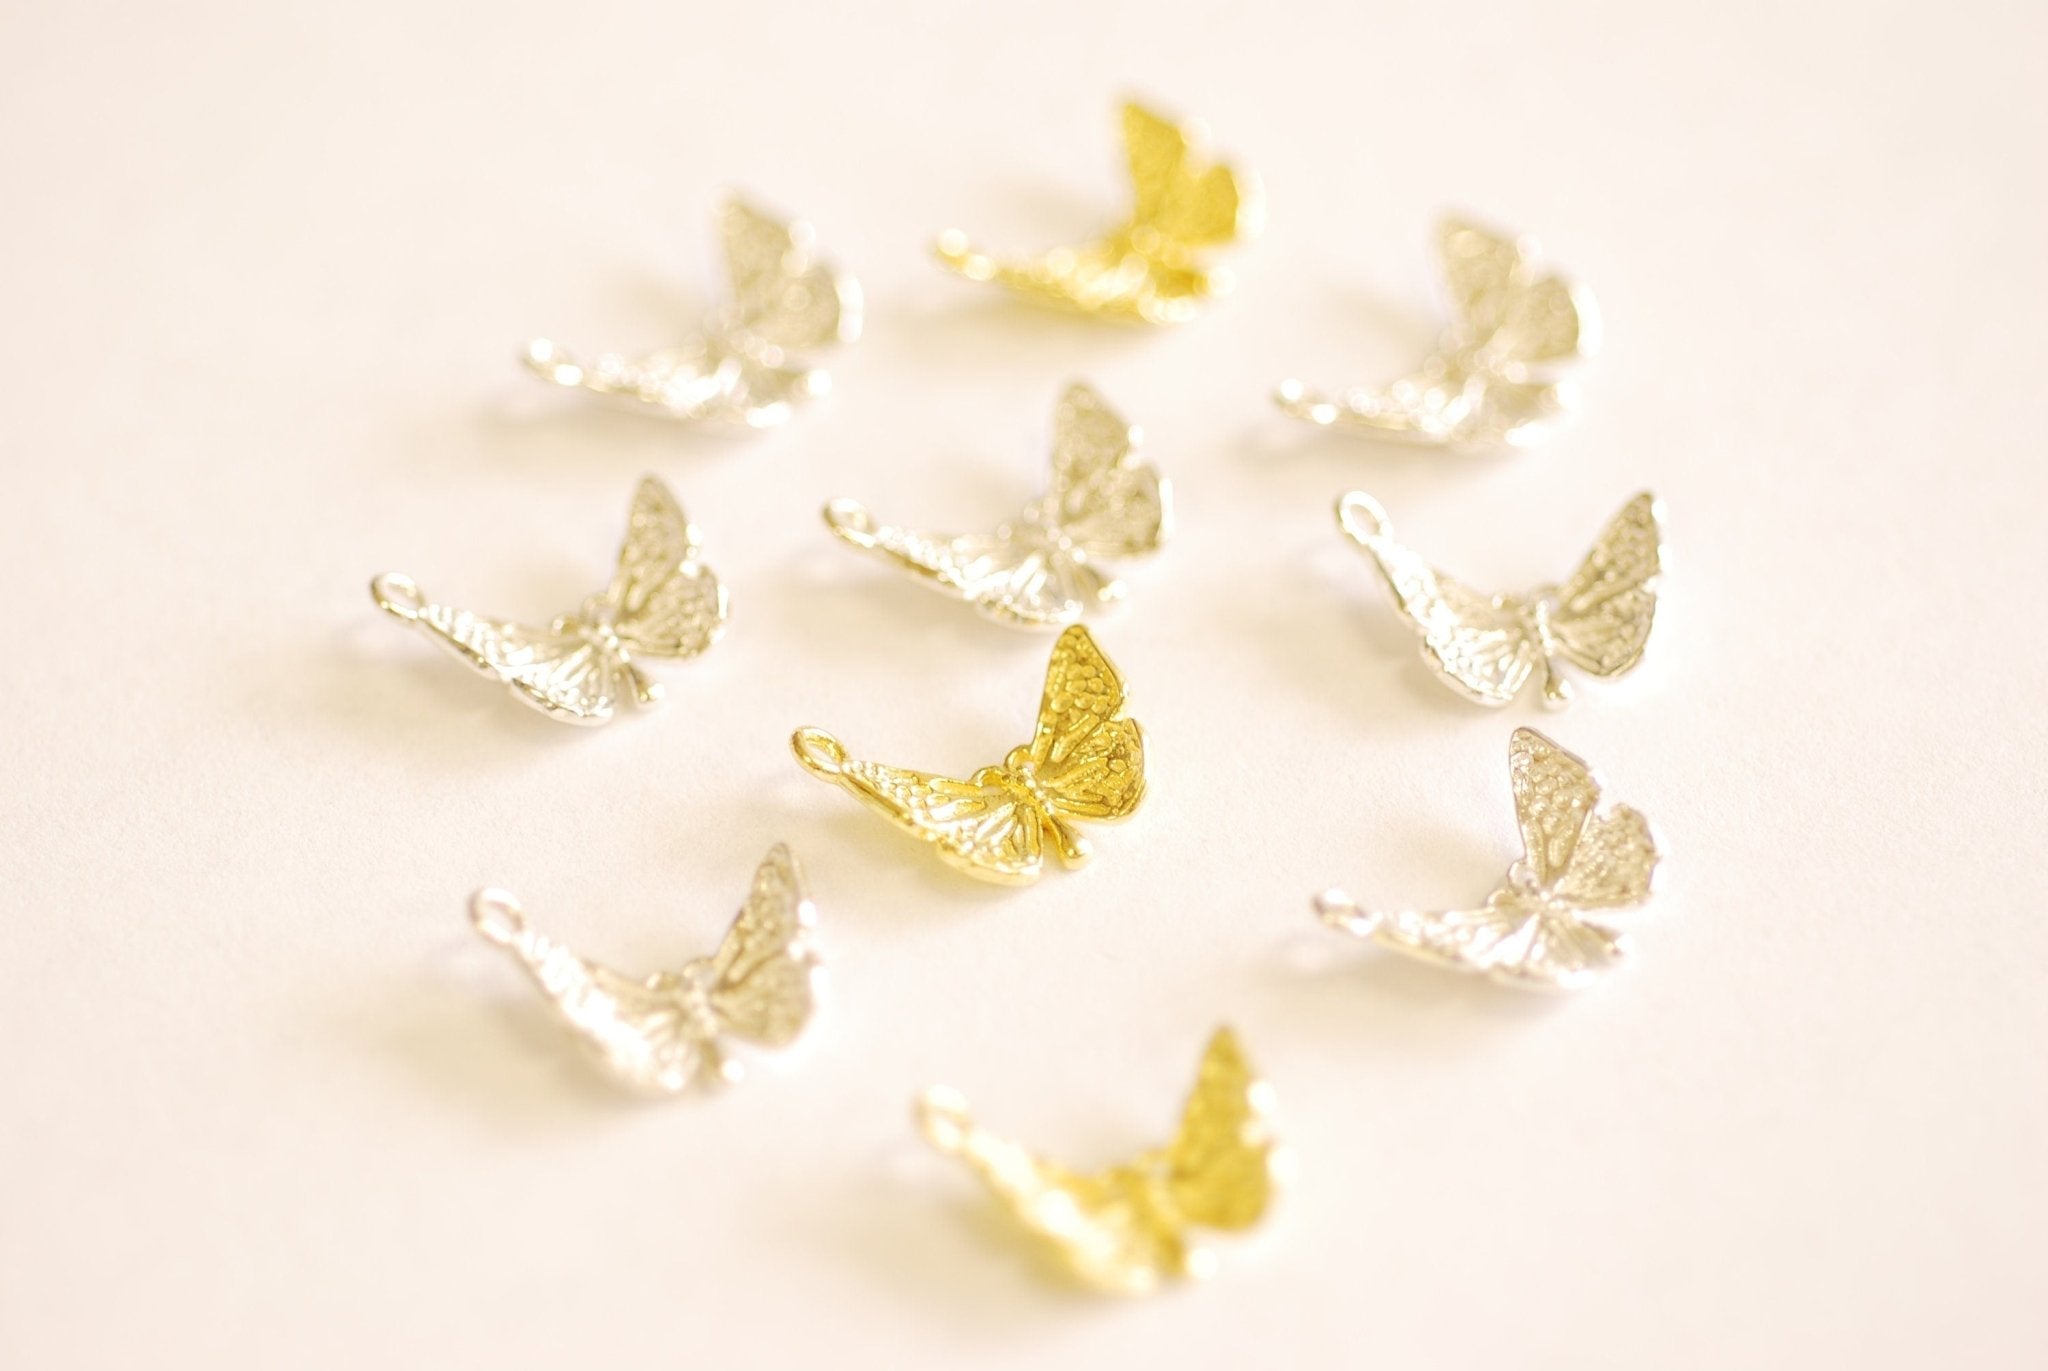 Butterfly Charm Pendant 925 Sterling Silver or 18k Gold Butterly Jewelry Making Supplies Wholesale Bulk Silver and Gold Charms - HarperCrown